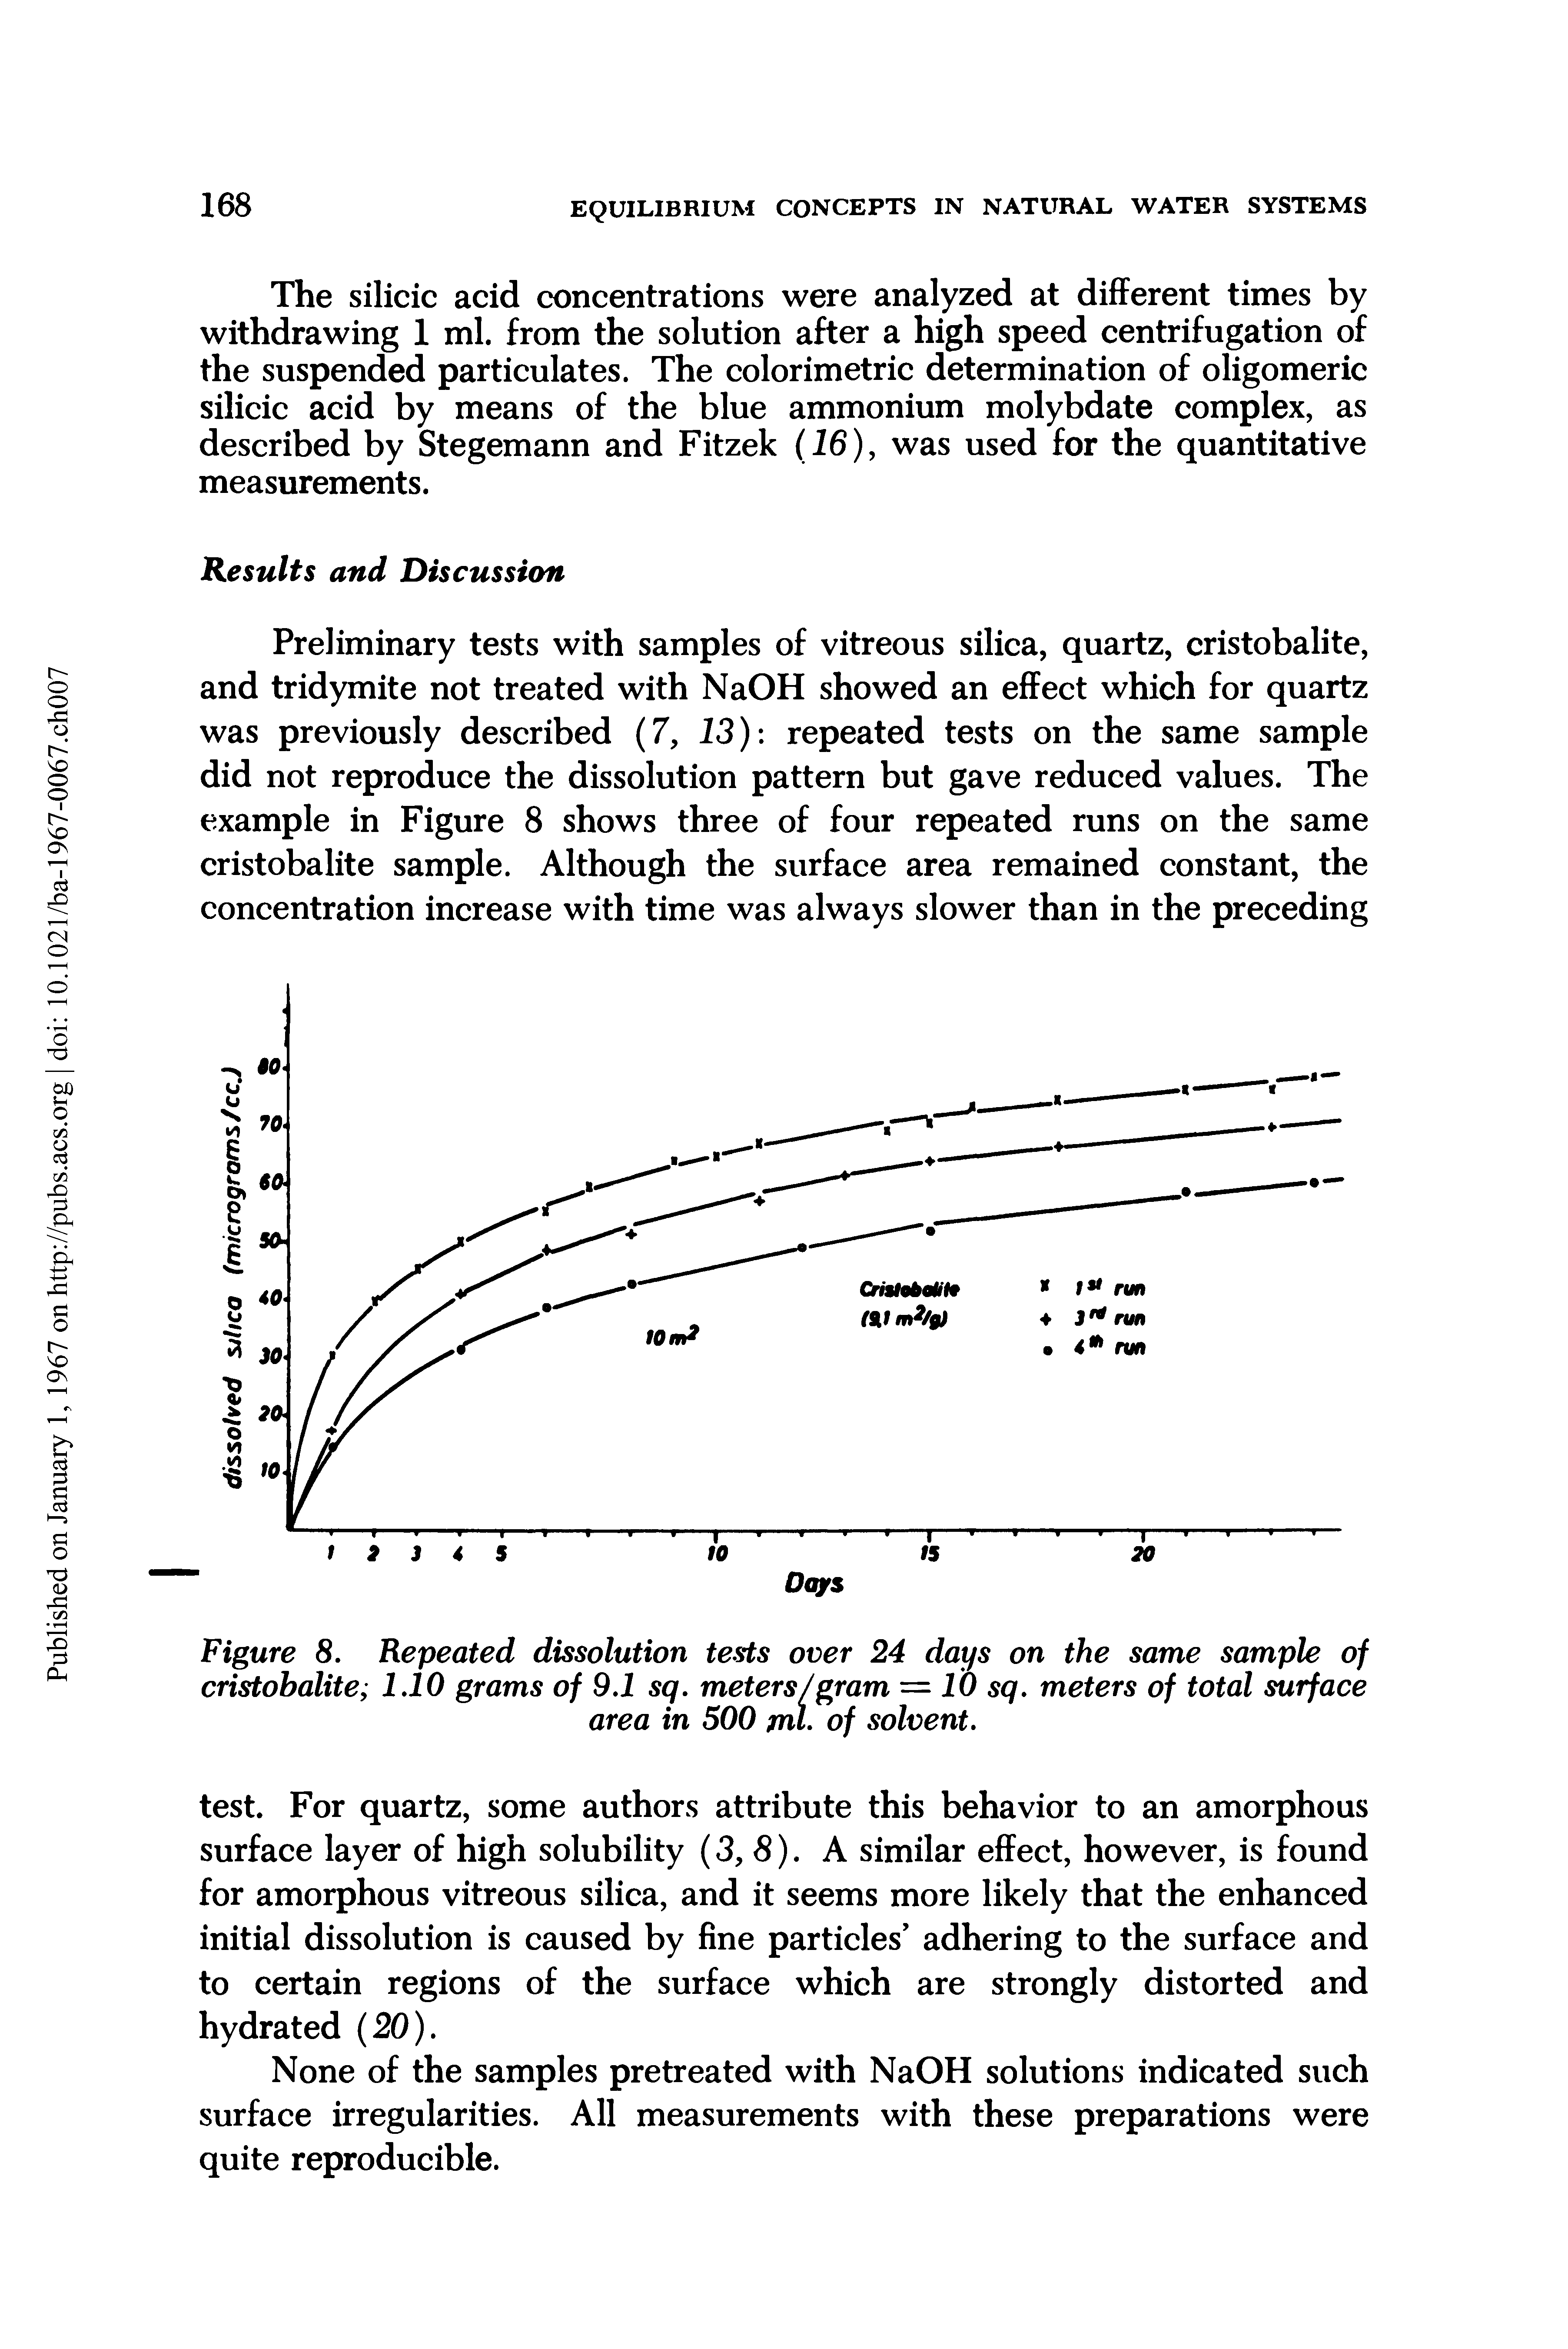 Figure 8. Repeated dissolution tests over 24 days on the same sample of cristobalite 1.10 grams of 9.1 sq. meters/gram = 10 sq. meters of total surface area in 500 ml- of solvent.